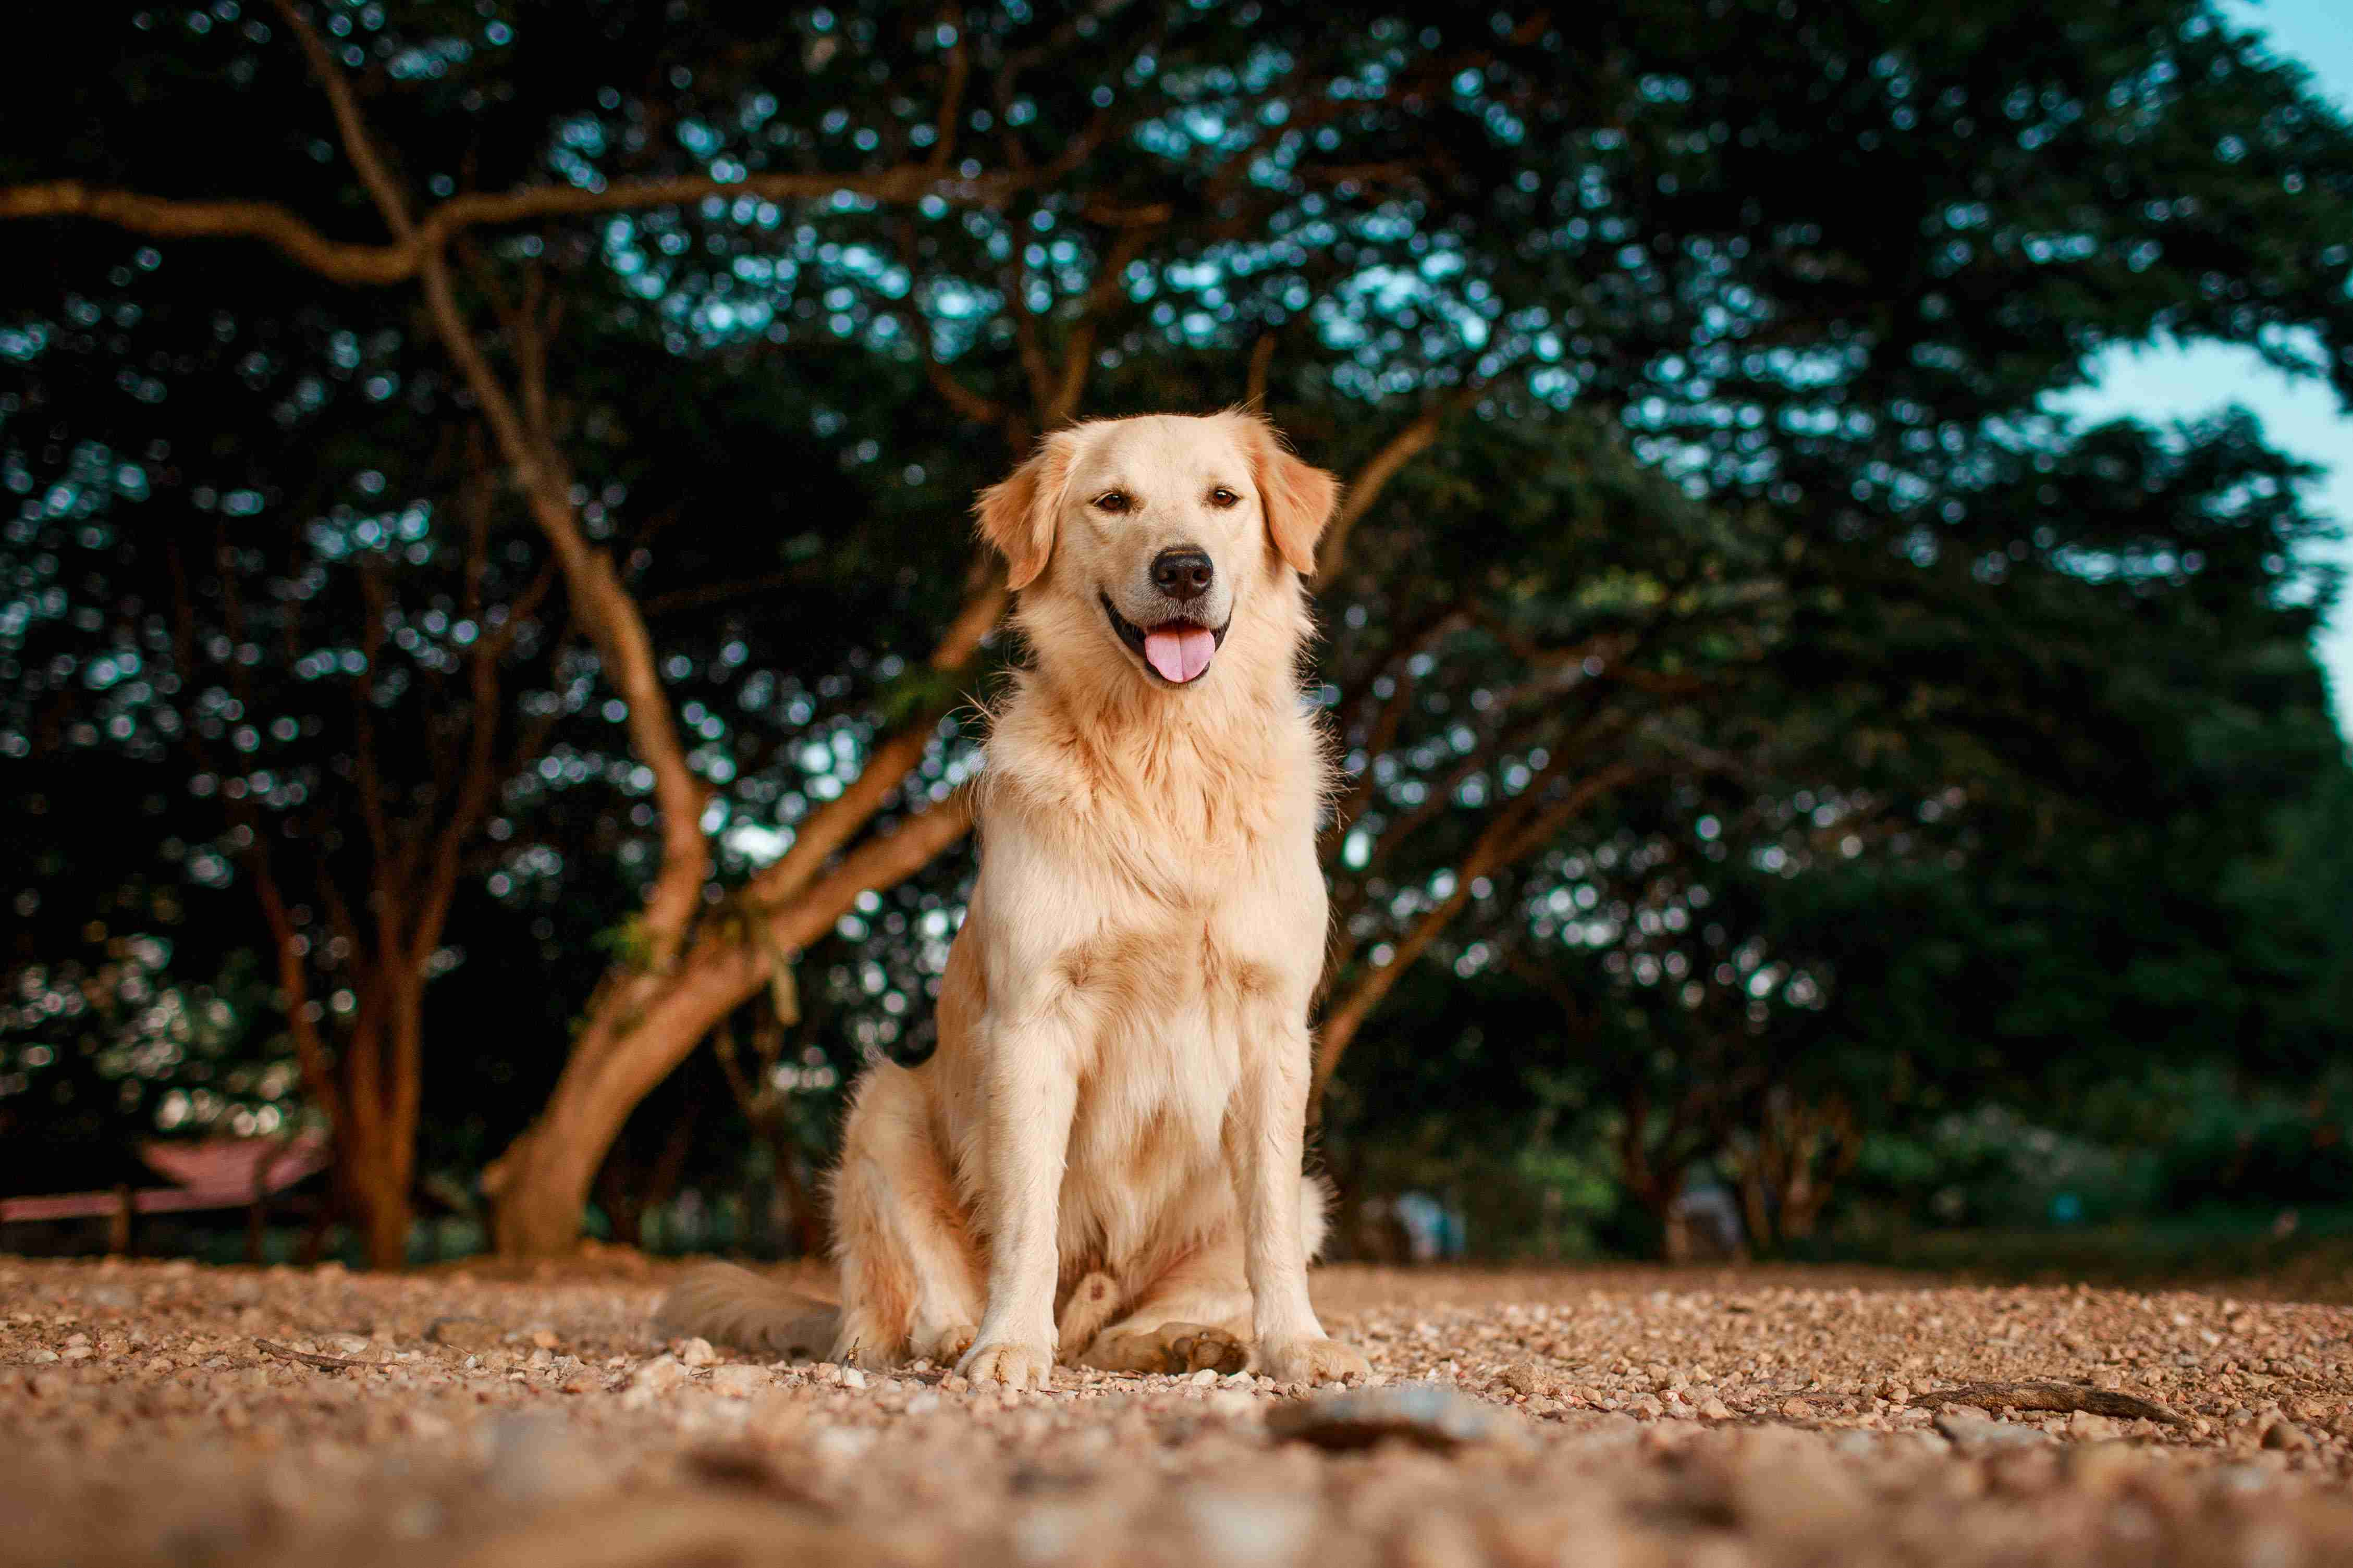 What are some healthy food options for a Golden Retriever?